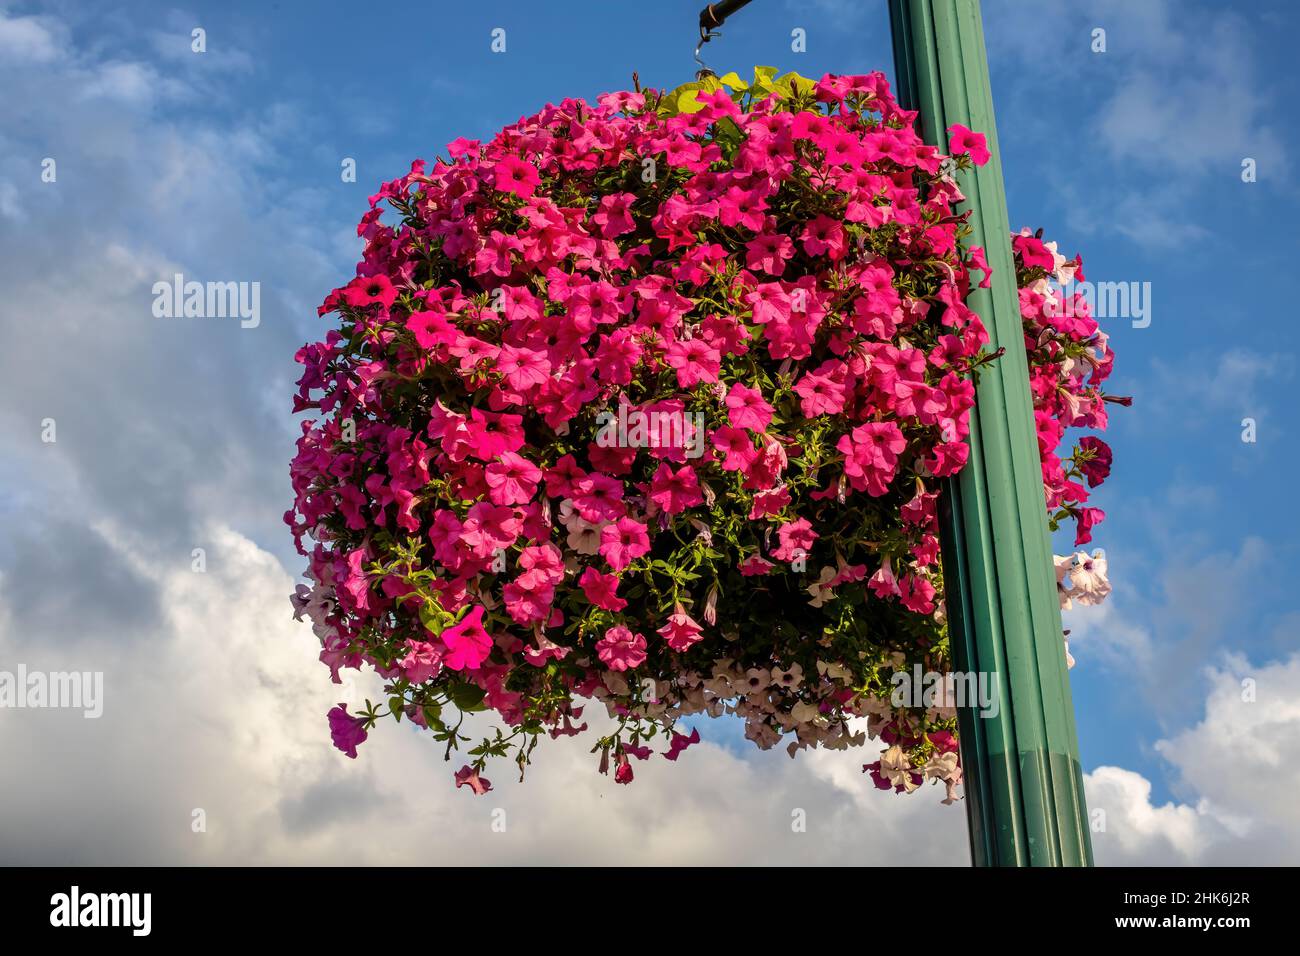 Town's hanging basket of pink petunias hanging from a lamppost in St. Croix Falls, Wisconsin USA. Stock Photo